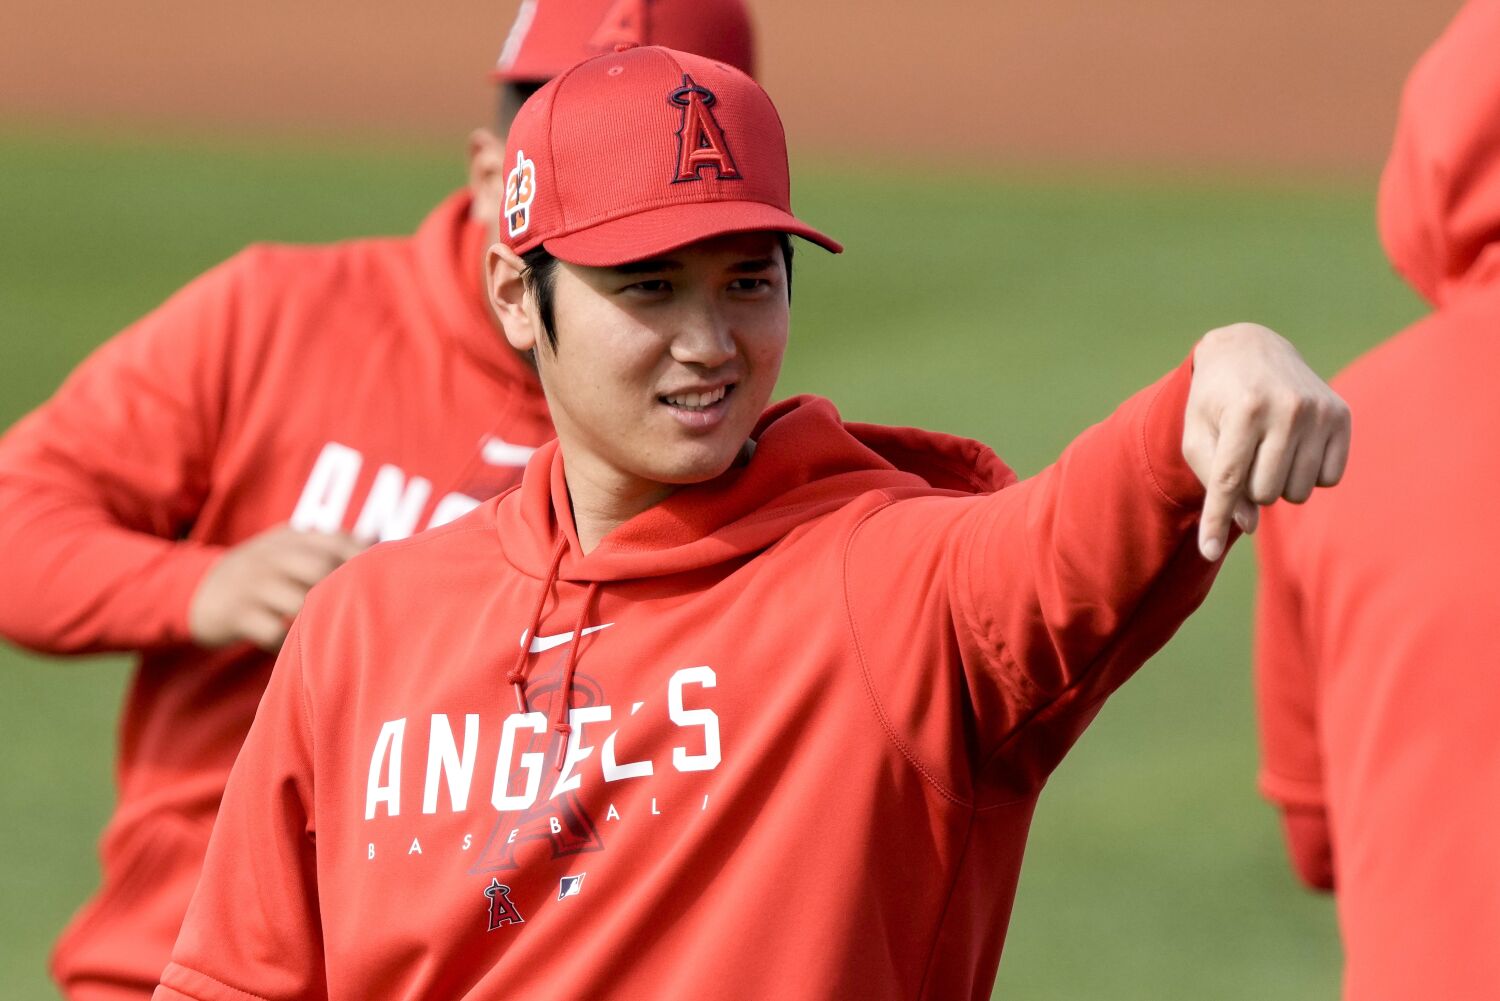 Shohei Ohtani's agent mum on Angels star's future: 'There's several layers to this'